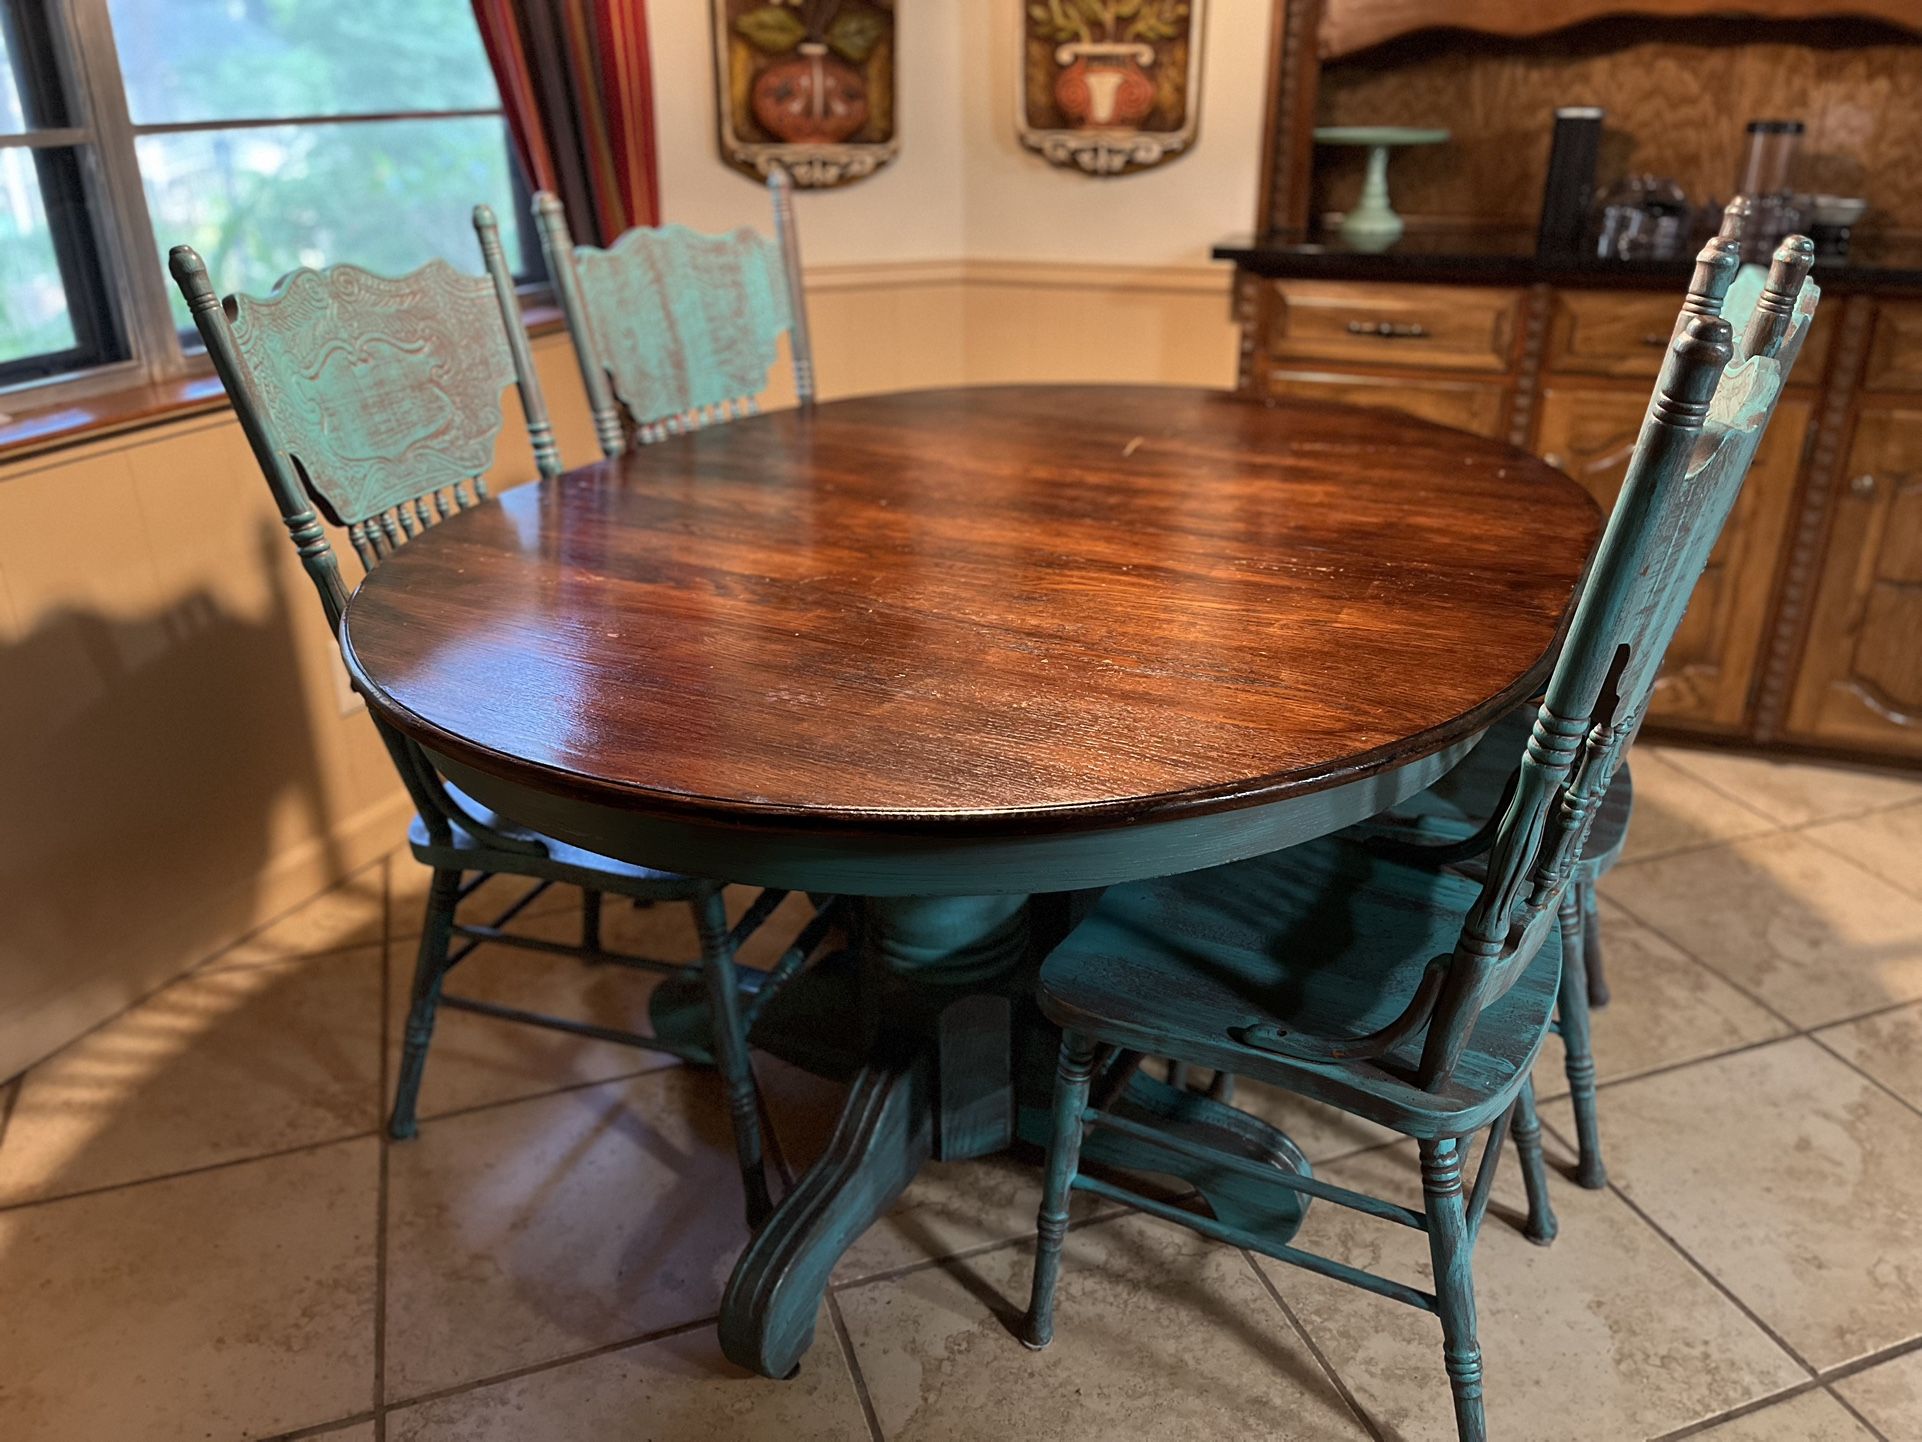 For Sale: Rustic Teal Table With Four Chairs